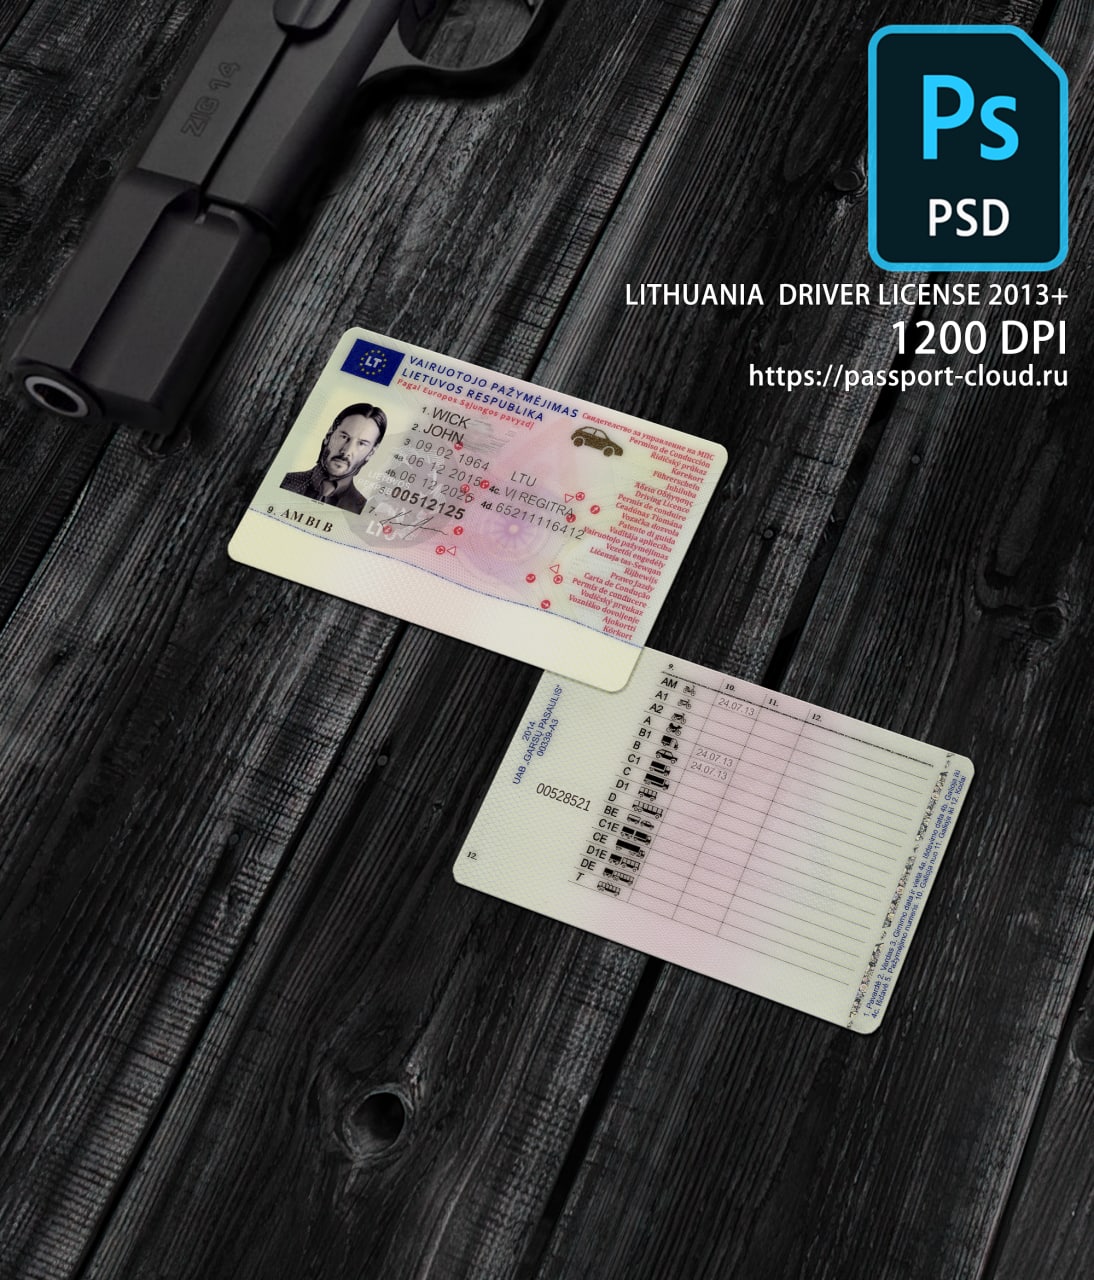 Lithuania Driver License 2013+-0